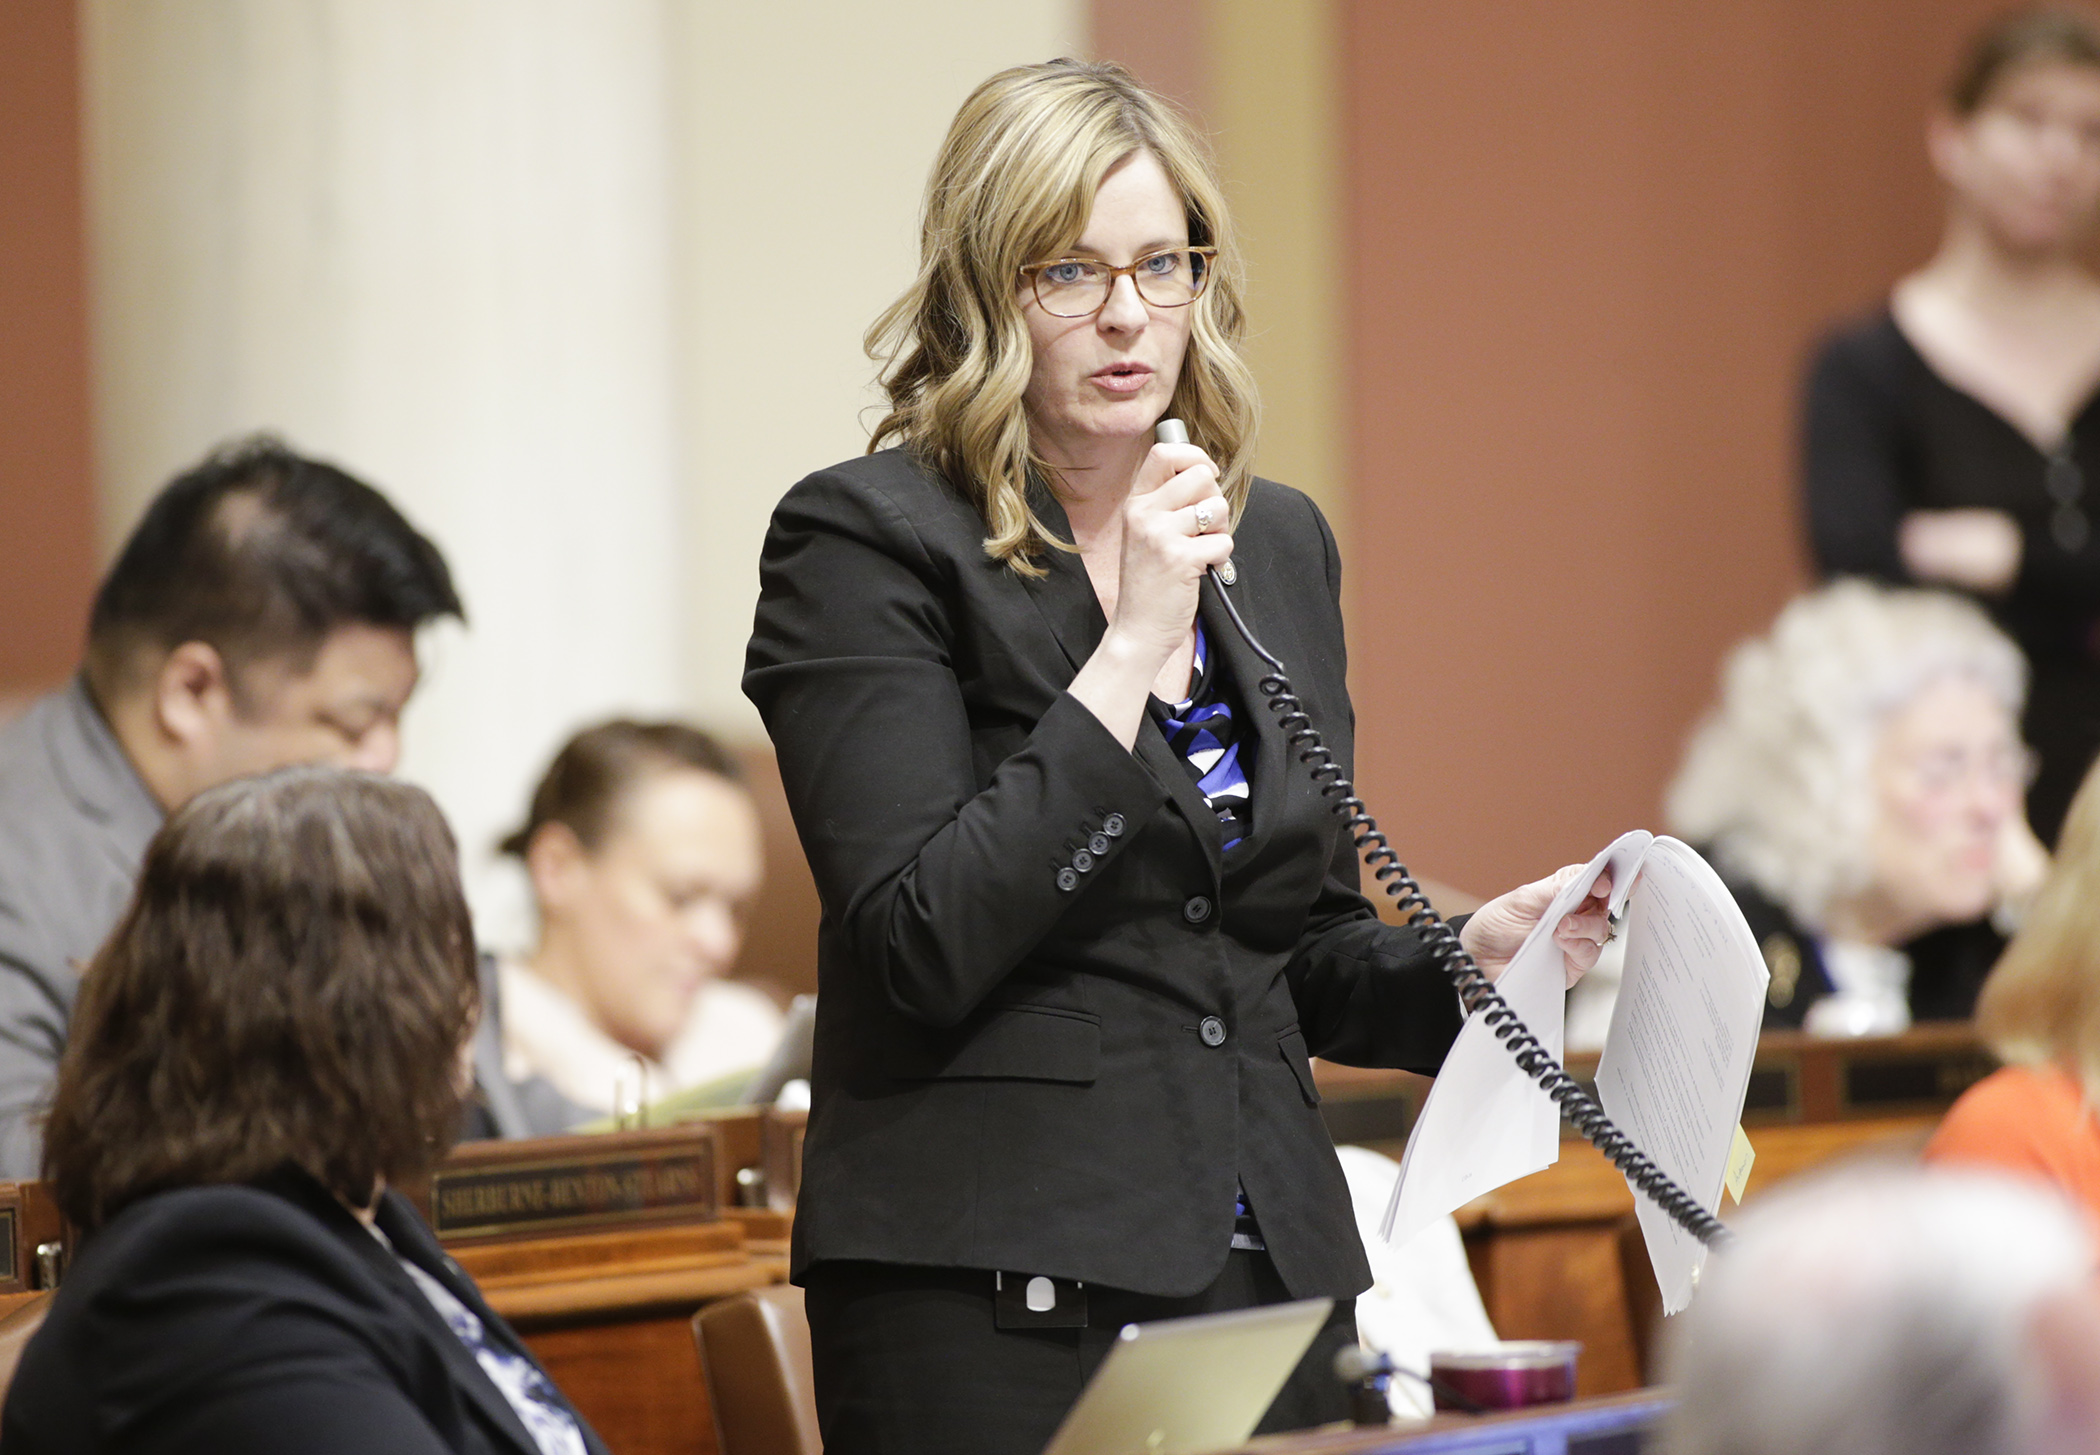 Rep. Kelly Moller makes closing comments during floor debate March 21 on HF10, legislation proposing to amend the definition of sexual harassment. The bill was passed 113-10. Photo by Paul Battaglia